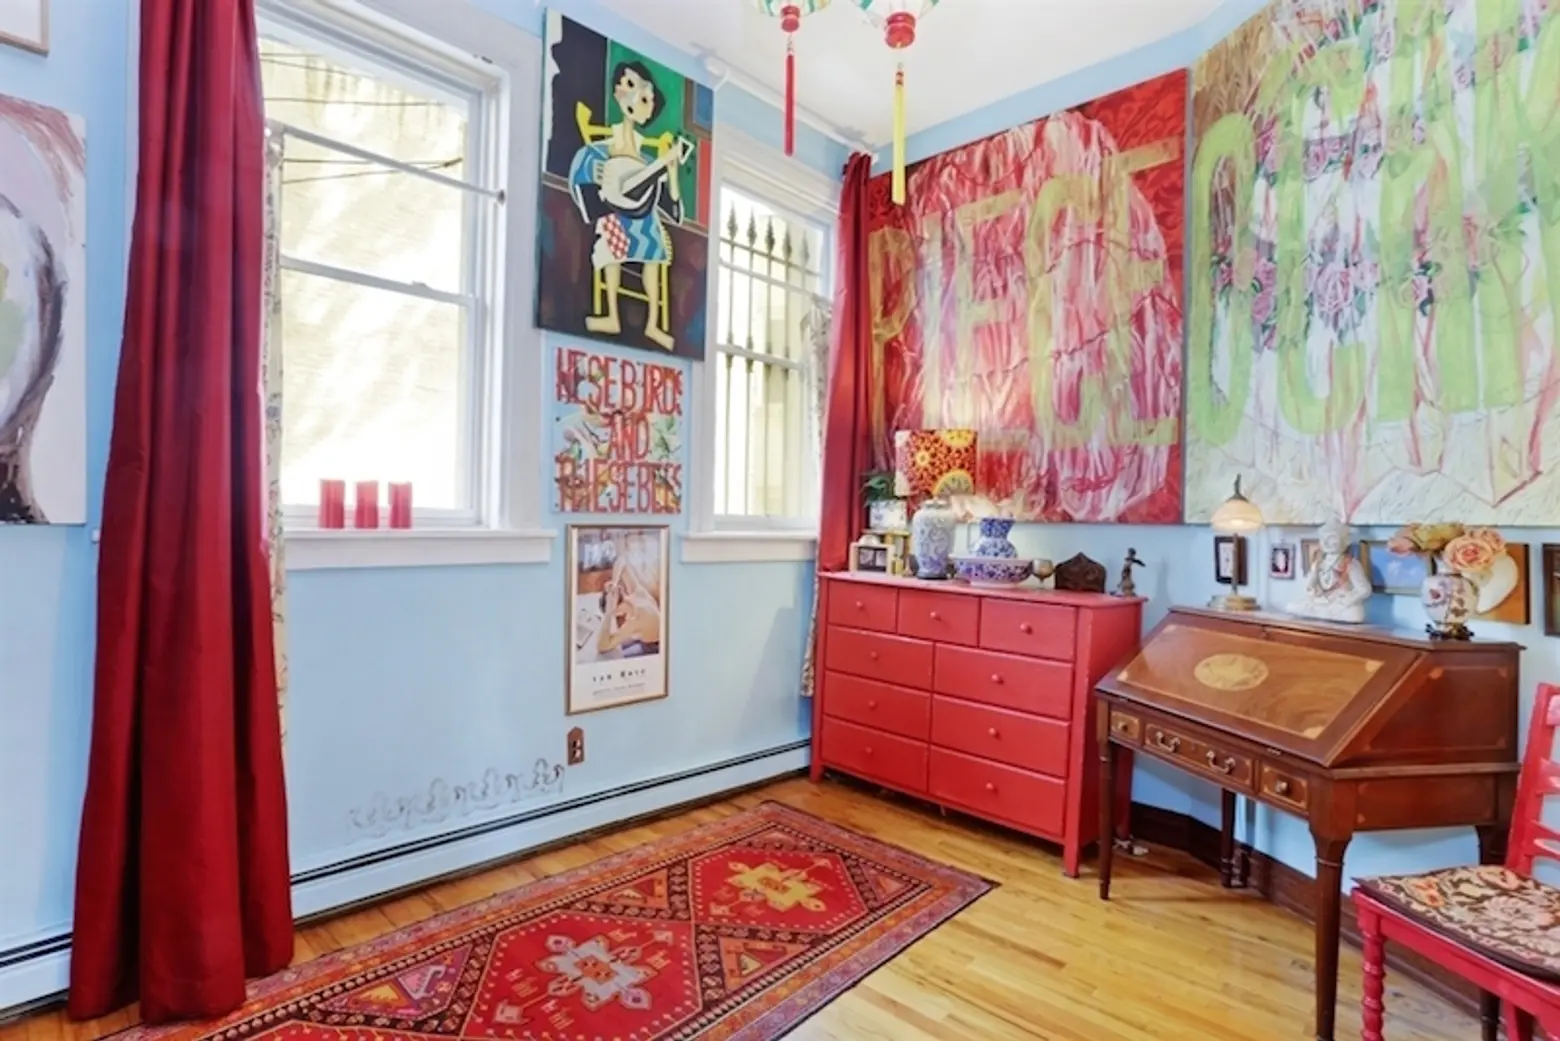 38A Windsor Place, 110 Clinton Avenue, High Low, Clinton Hill, Park Slope, Brooklyn, Cool Listings, Townhouse, Garden